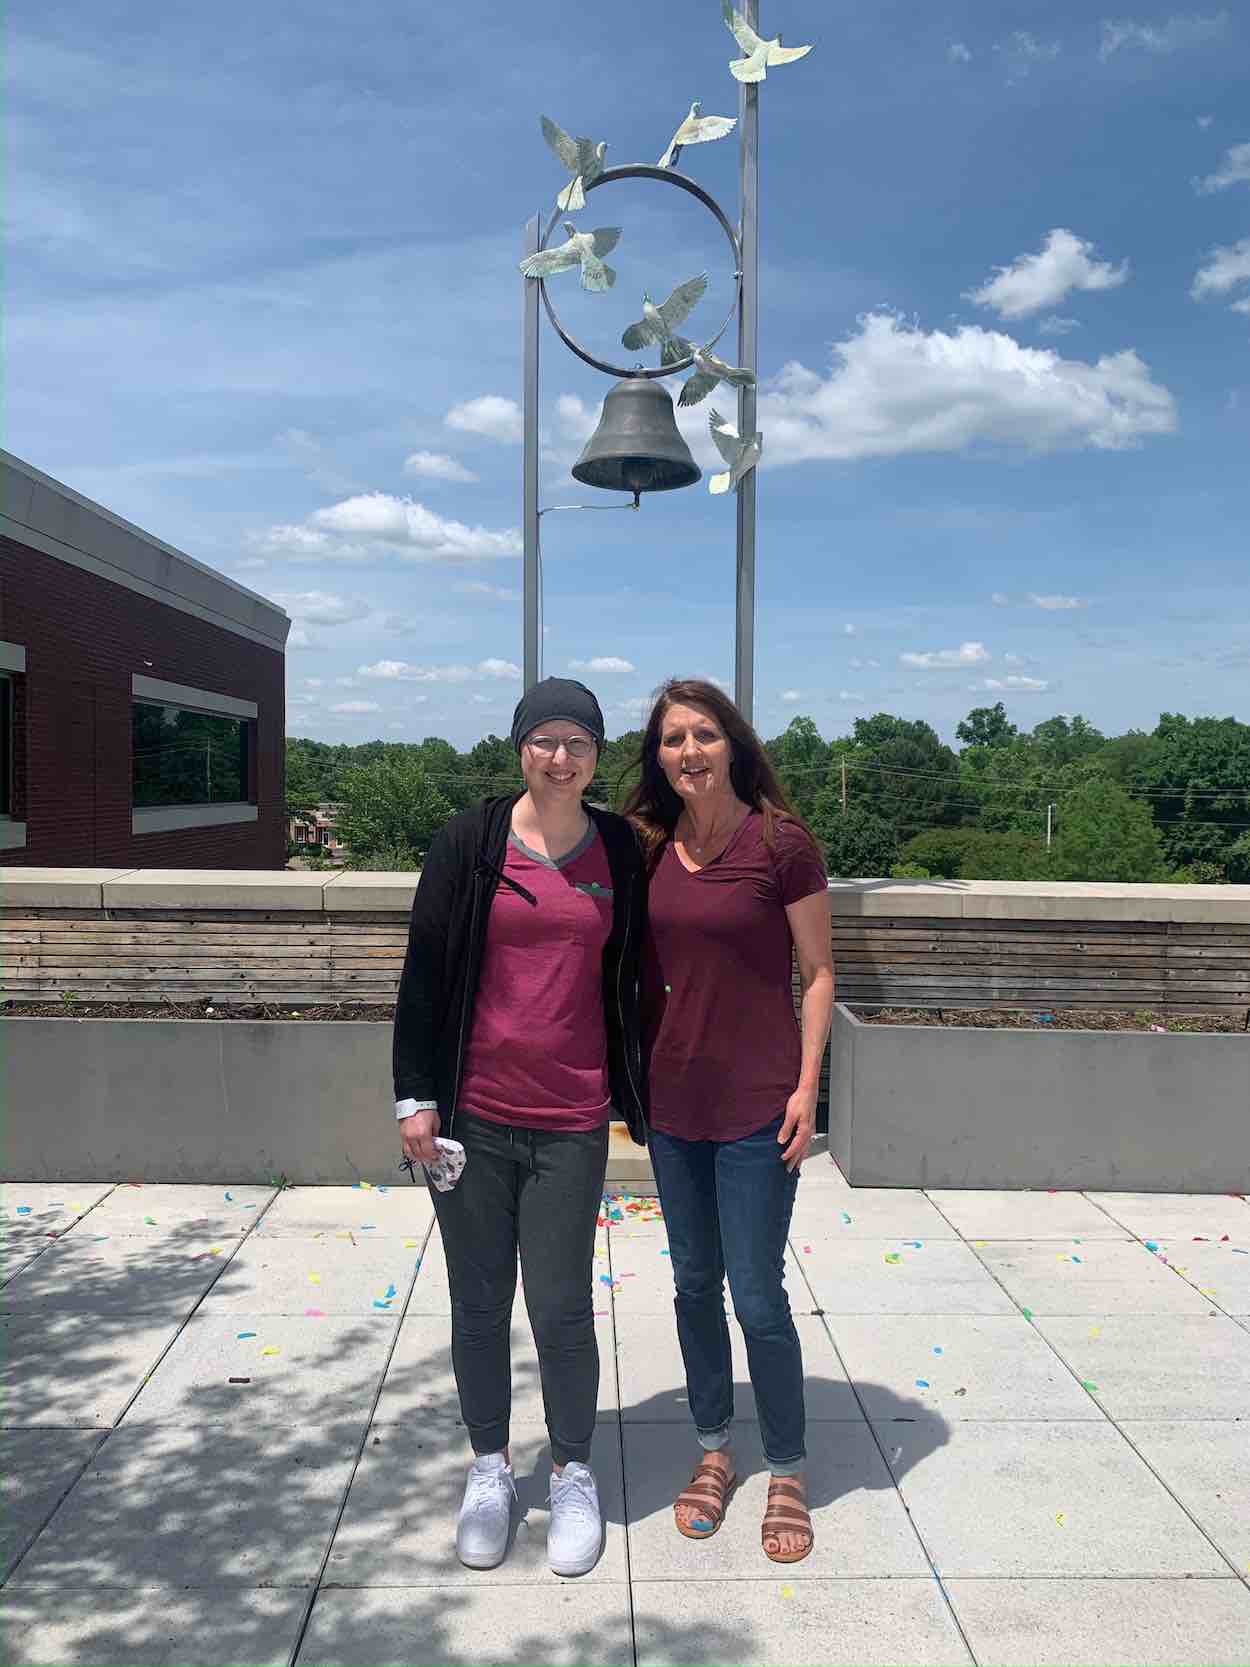 Heidi Myers poses with her mom after ringing the bell on her last day of chemotherapy. ‘All the nurses working in infusion had confetti and cheered, so it was a nice moment,’ Myers said. Submitted photo